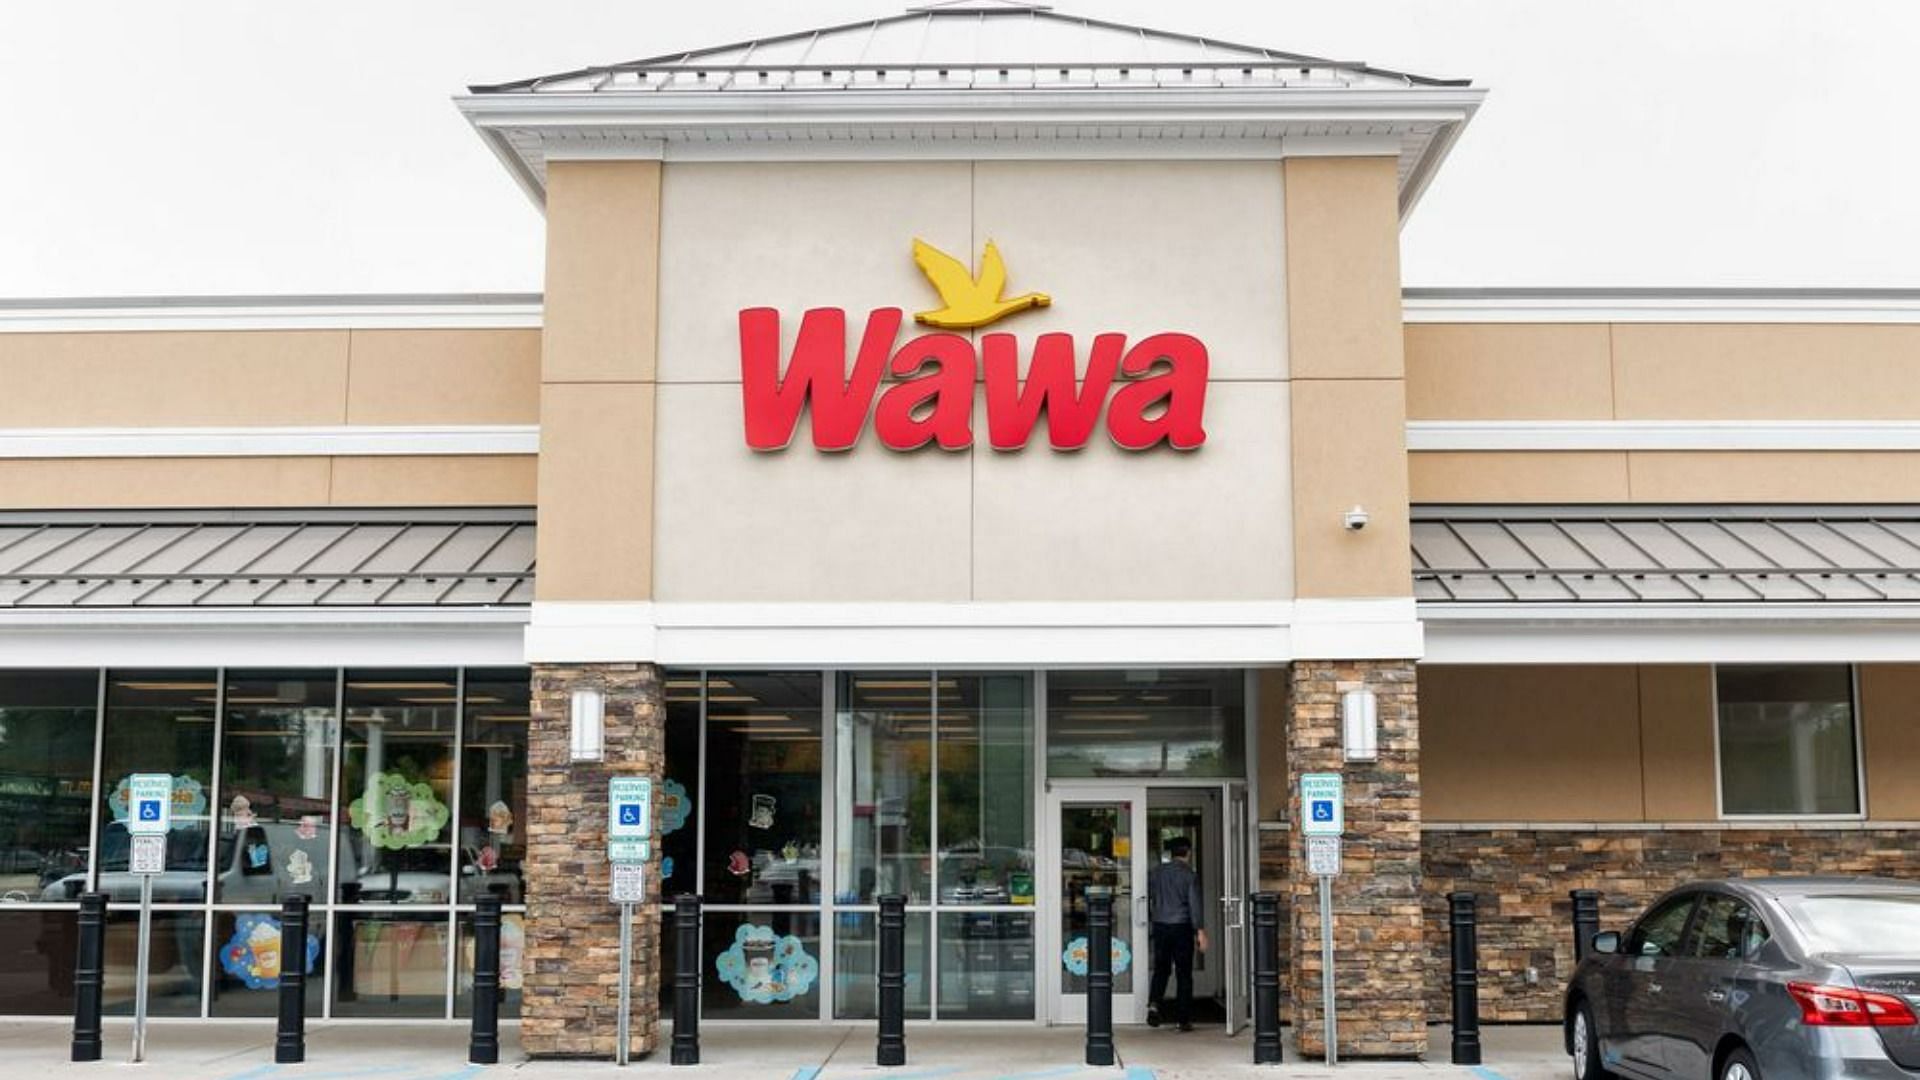 Wawa Free Coffee Day How to get, locations and all you need to know